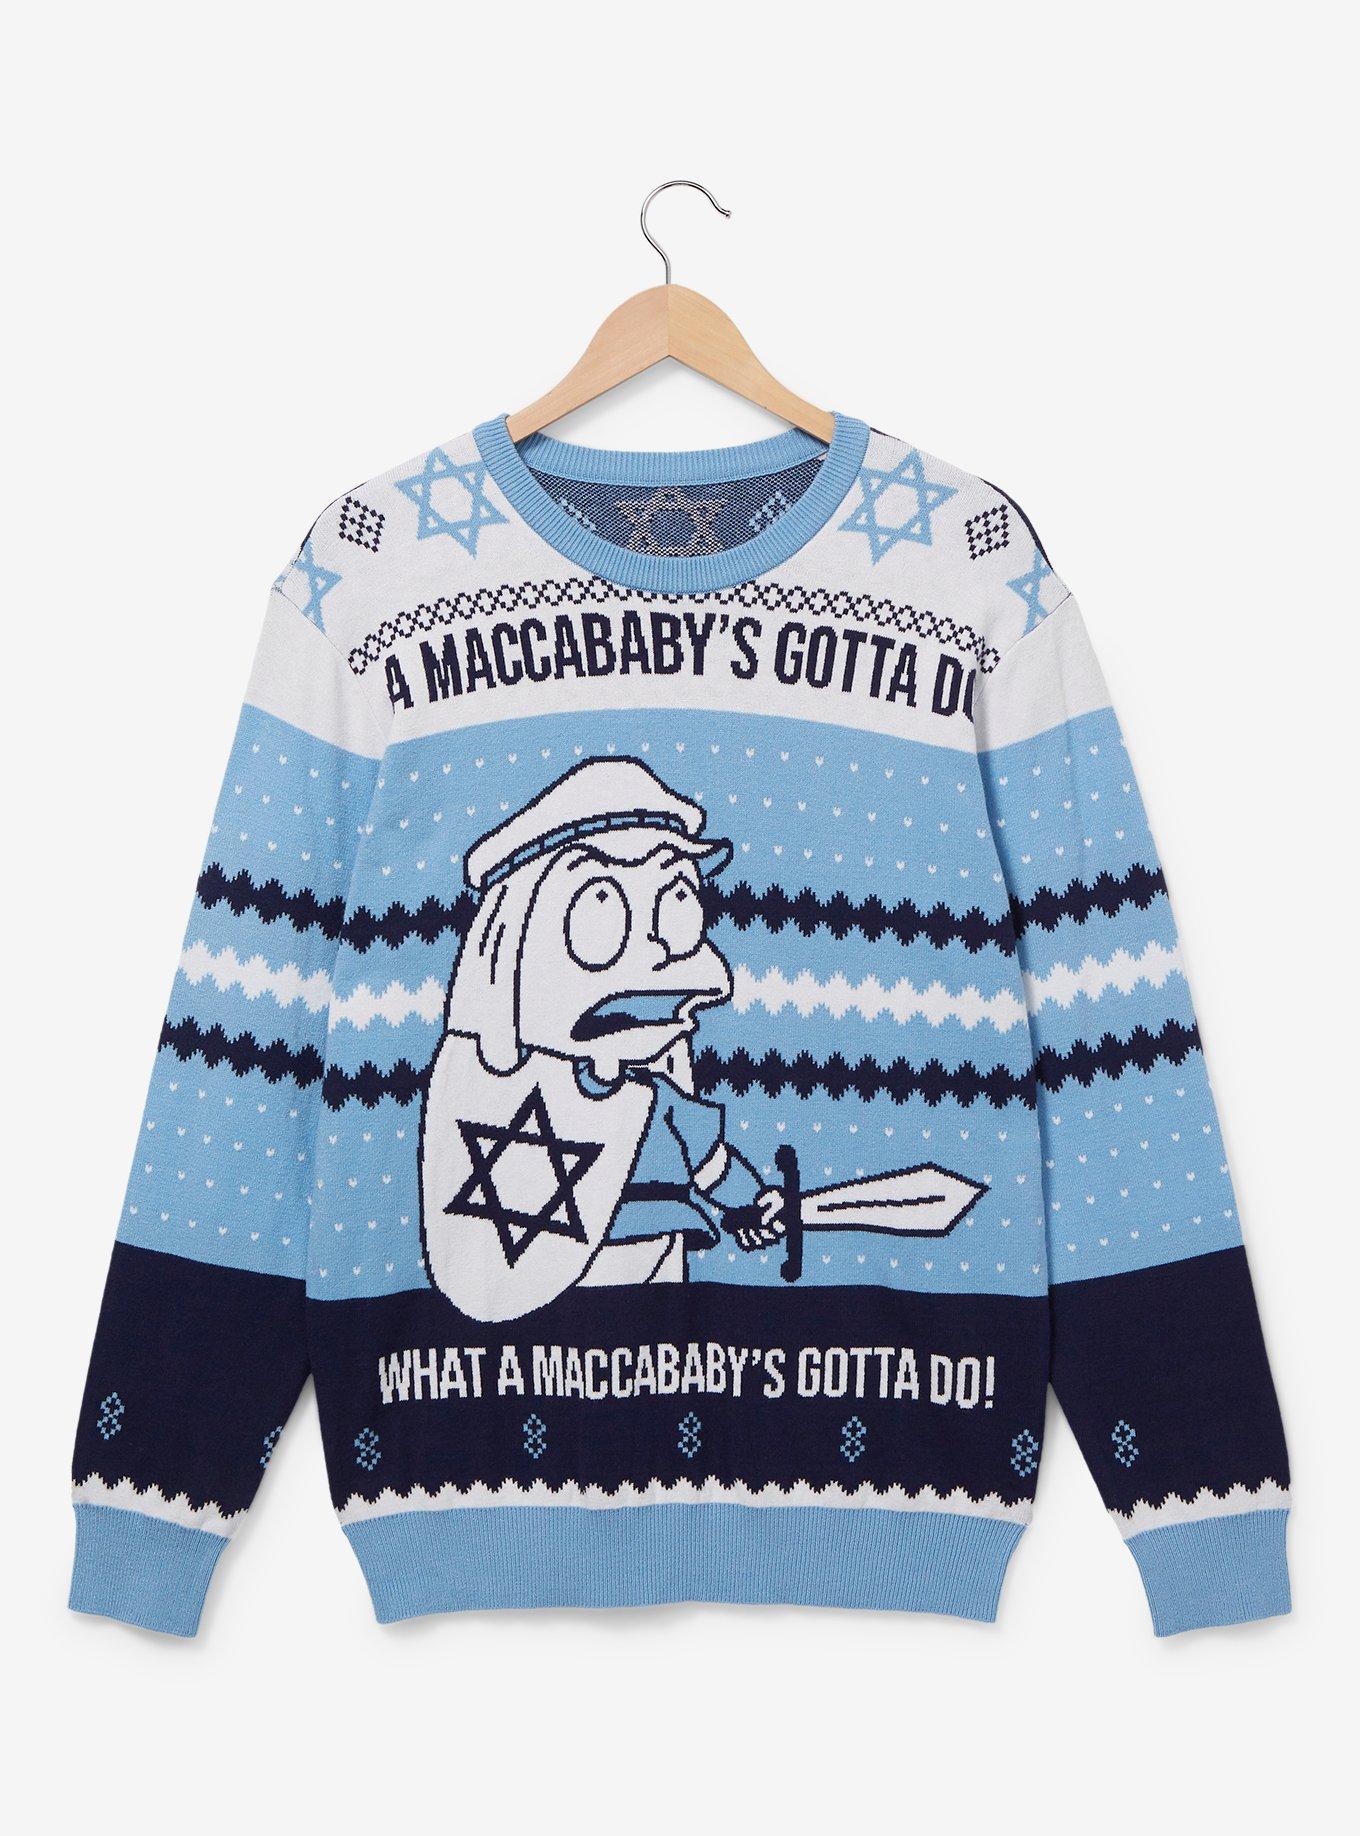 Rugrats Tommy Pickles Maccababy Holiday Sweater - BoxLunch Exclusive, LIGHT BLUE, hi-res